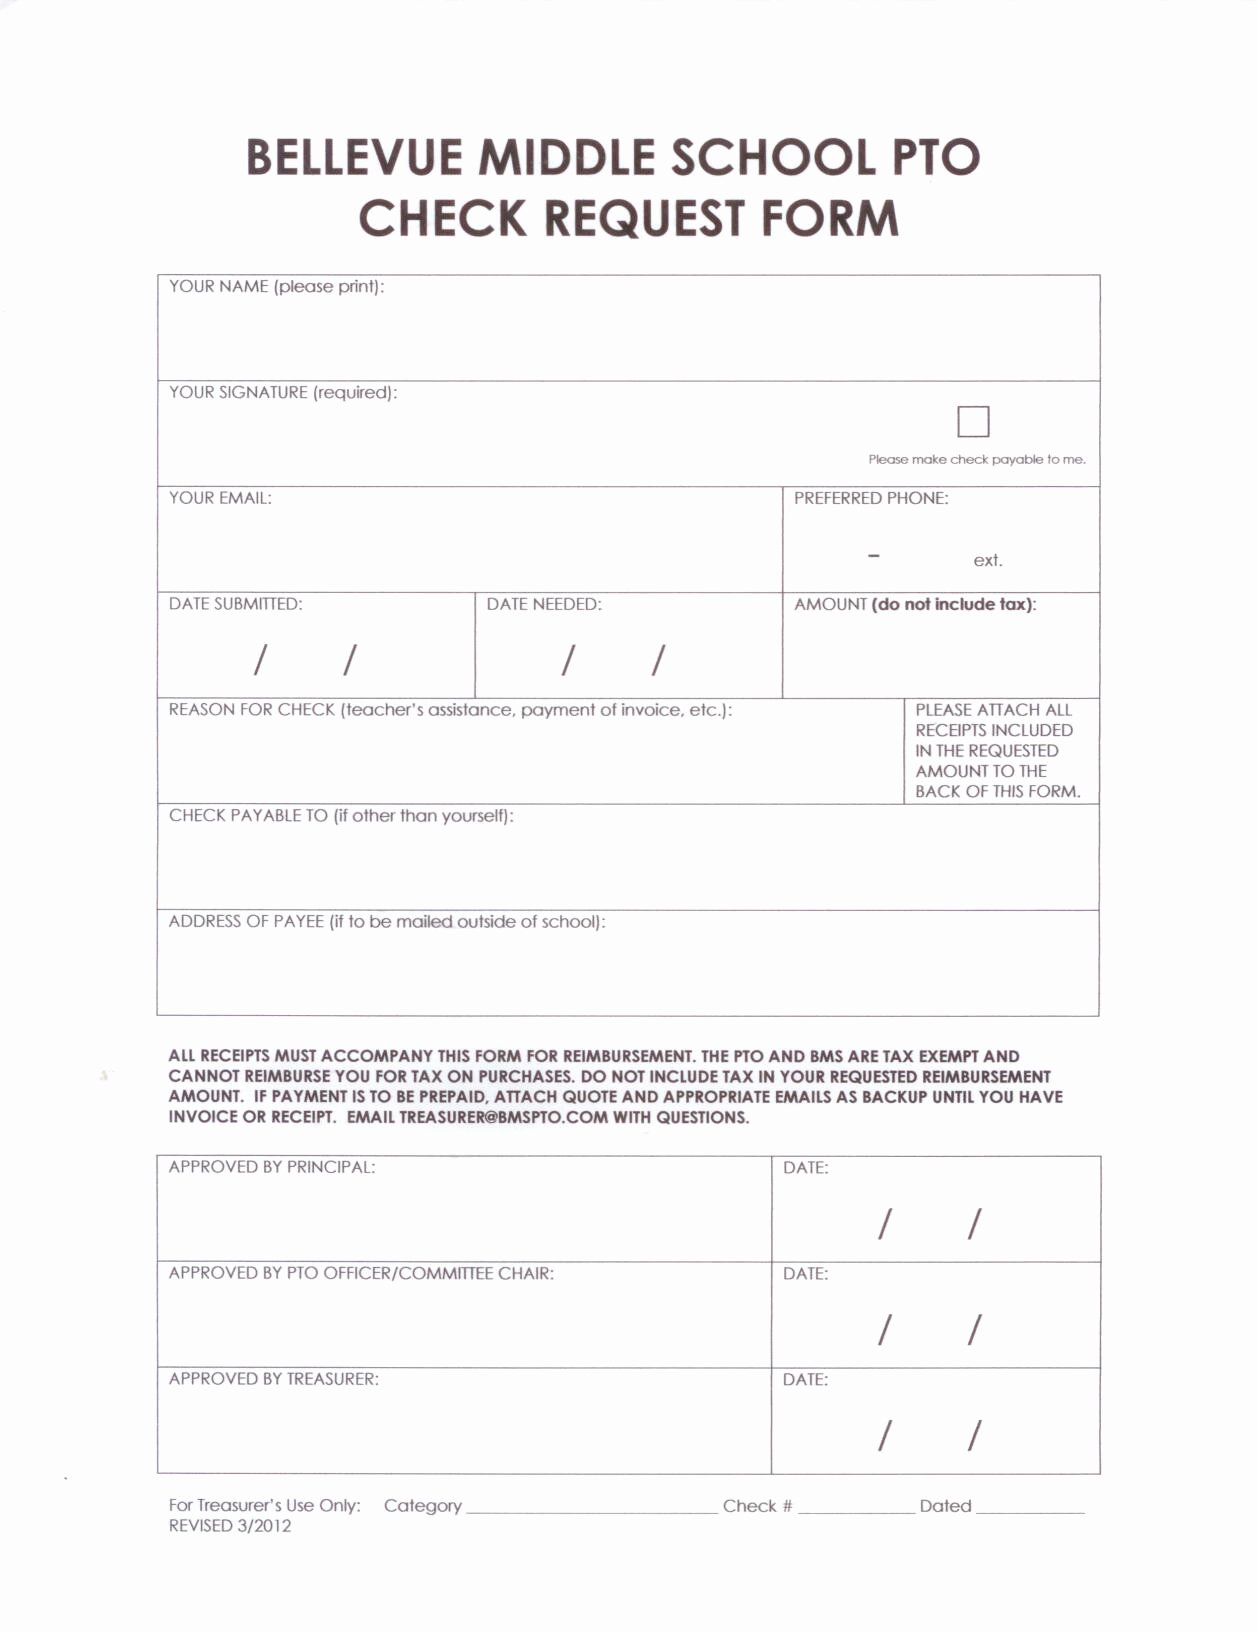 Pto Request form Template Elegant Documents forms Bellevue Middle Pto